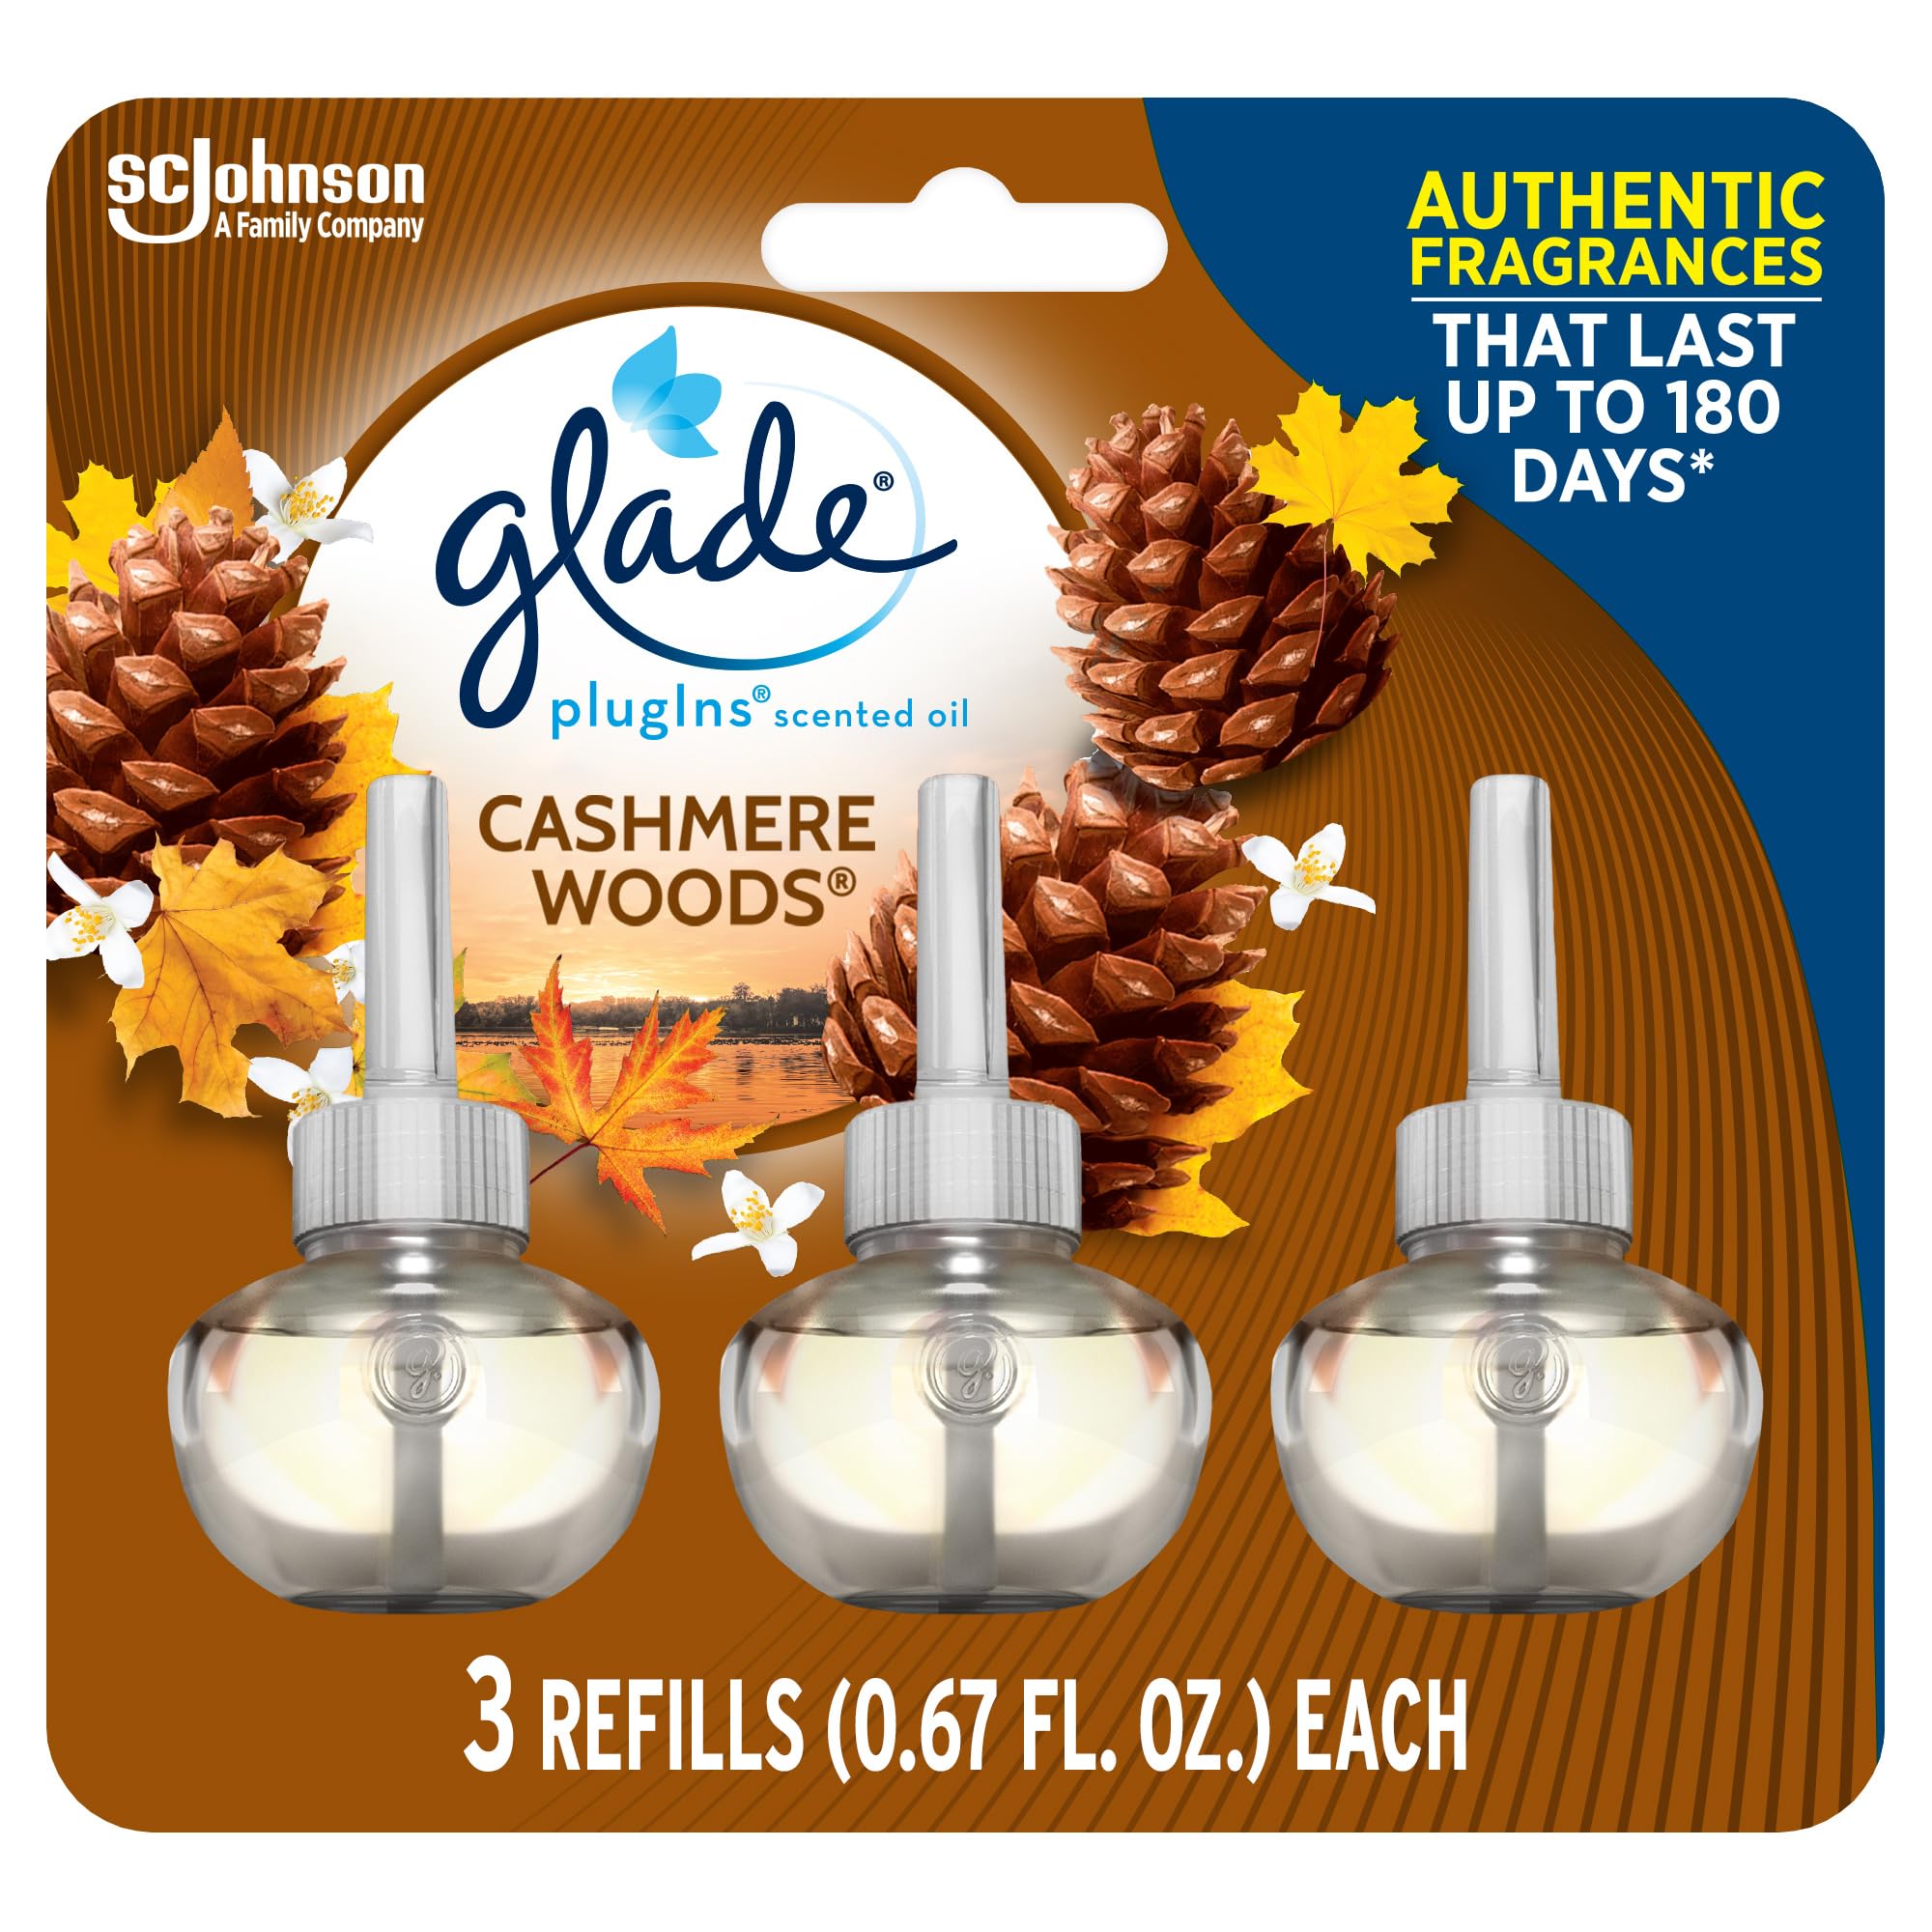 3-Count 2.01-Oz Glade PlugIns Refills Air Freshener (Cashmere Woods) $3.99 w/ S&S + Free Shipping w/ Prime or on $35+